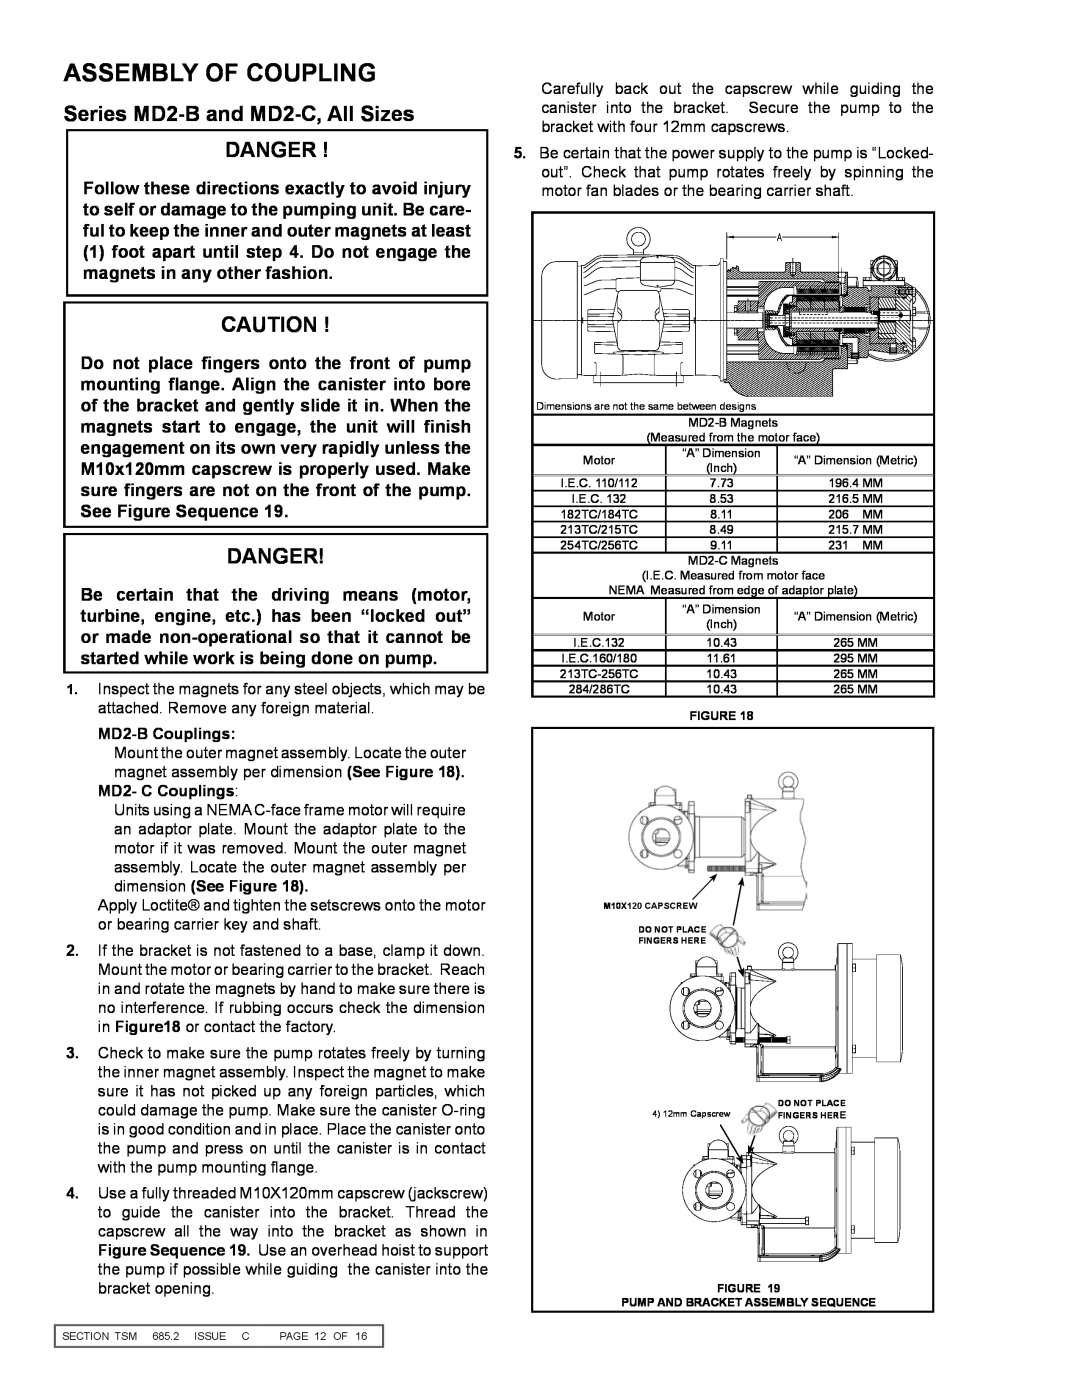 Viking 855 service manual Assembly Of Coupling, Series MD2-Band MD2-C,All Sizes DANGER, Danger 